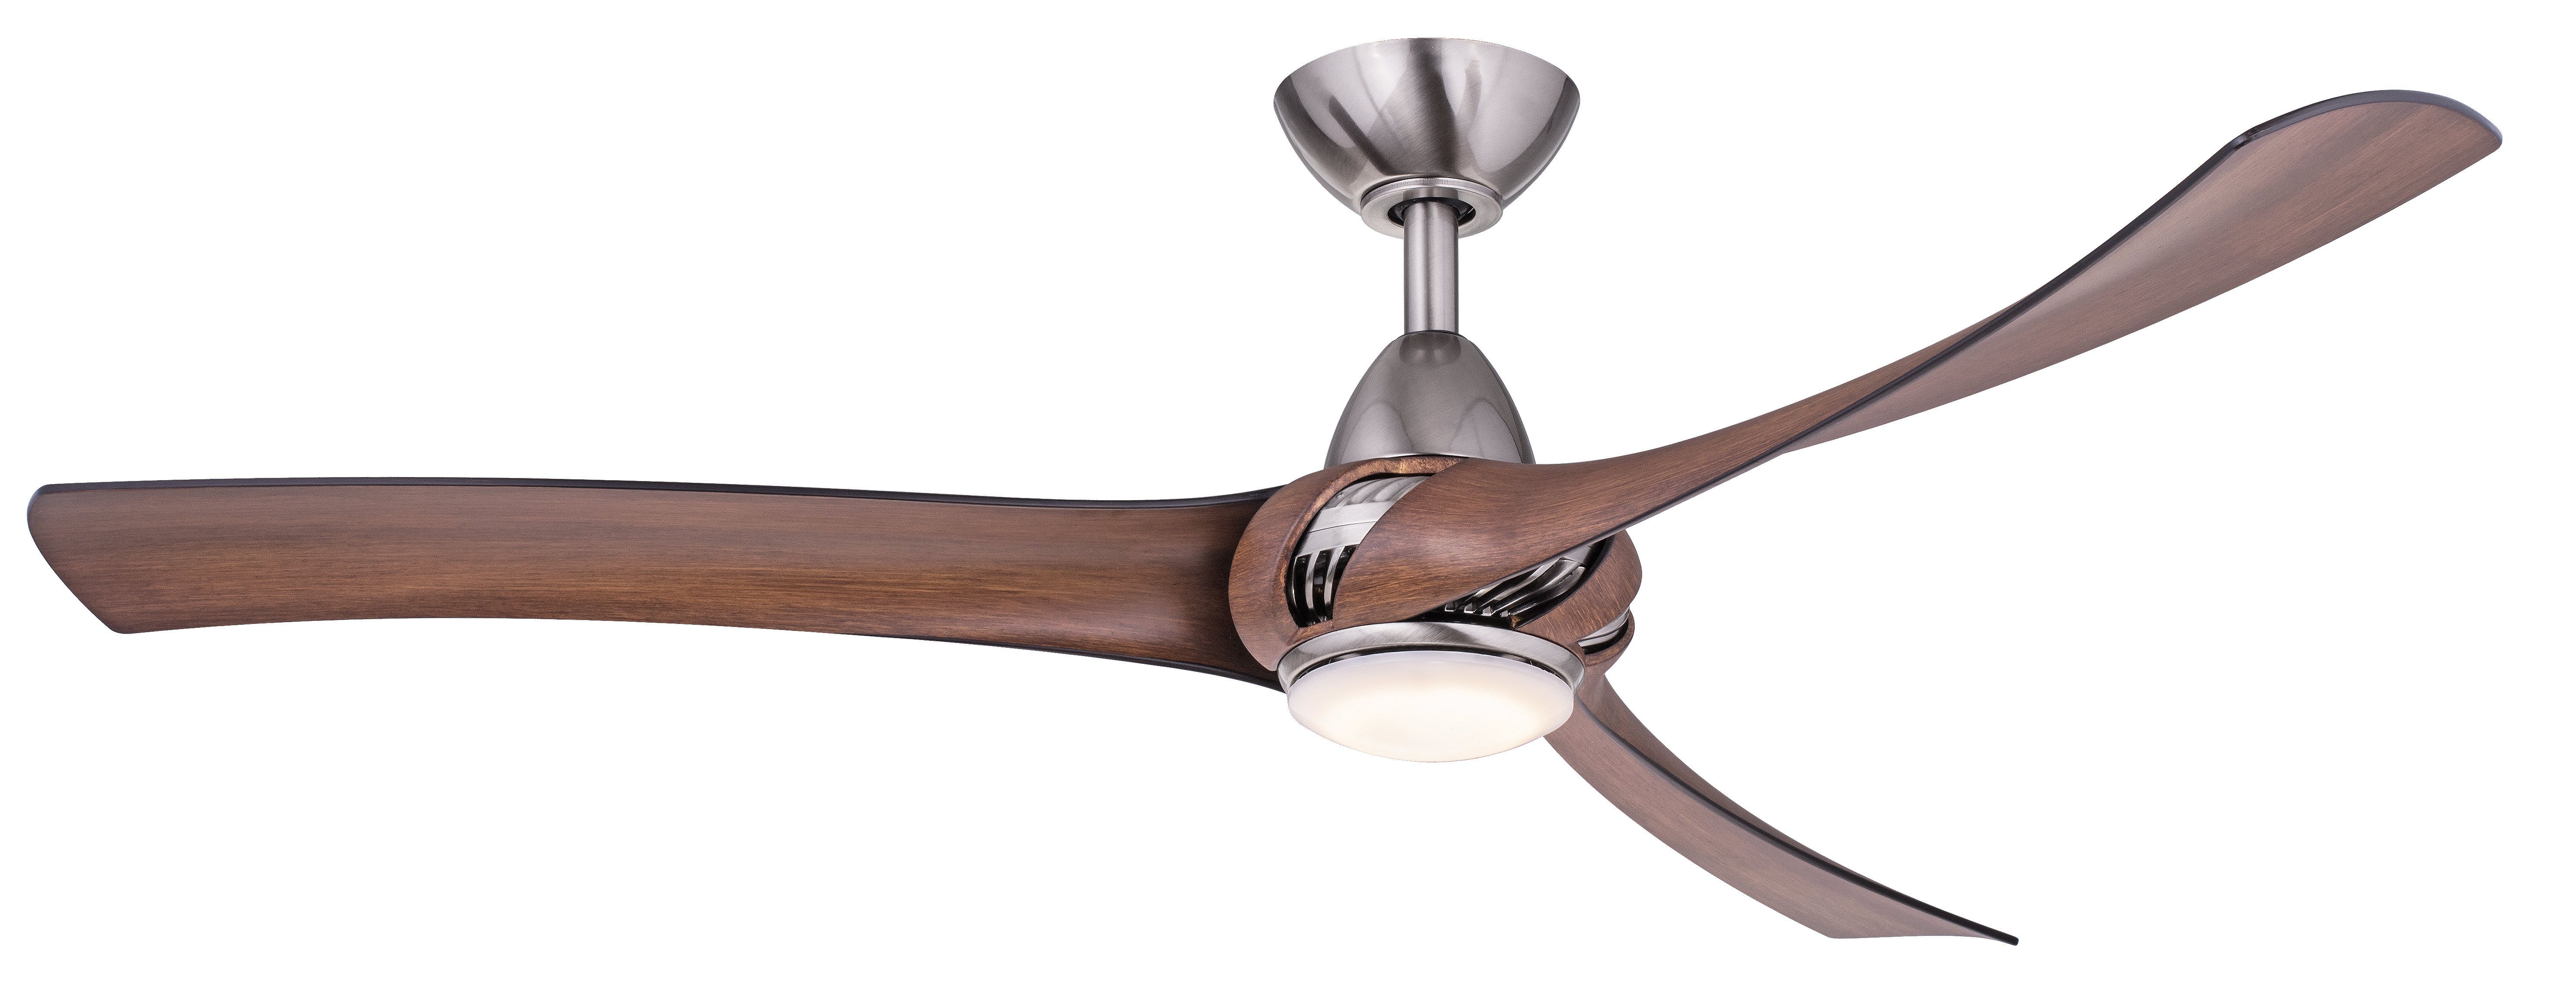 52'' Cairo 3 Blade Led Ceiling Fan With Remote, Light Kit Included Within 2020 Cairo 3 Blade Led Ceiling Fans With Remote (Photo 1 of 20)